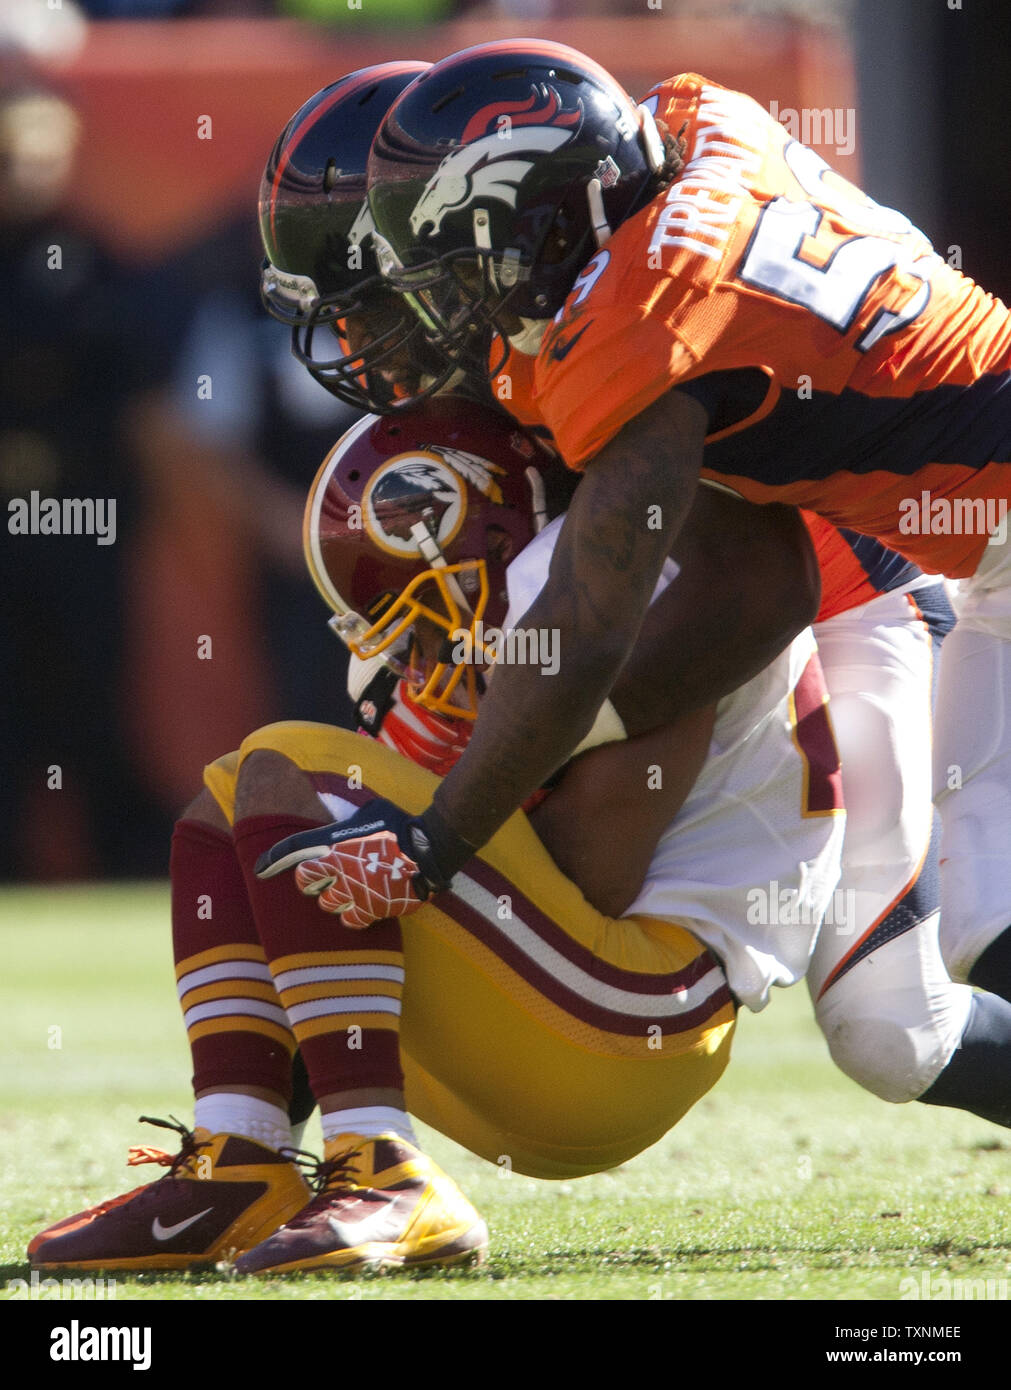 Denver Broncos Robert Ayers and Danny Trevathan tackle Washington Redskins running back Roy Helu Jr. after he picked up a Redskins fumble during the first quarter at Sports Authority Field at Mile High in Denver on October 27, 2013.     UPI/Gary C. Caskey Stock Photo